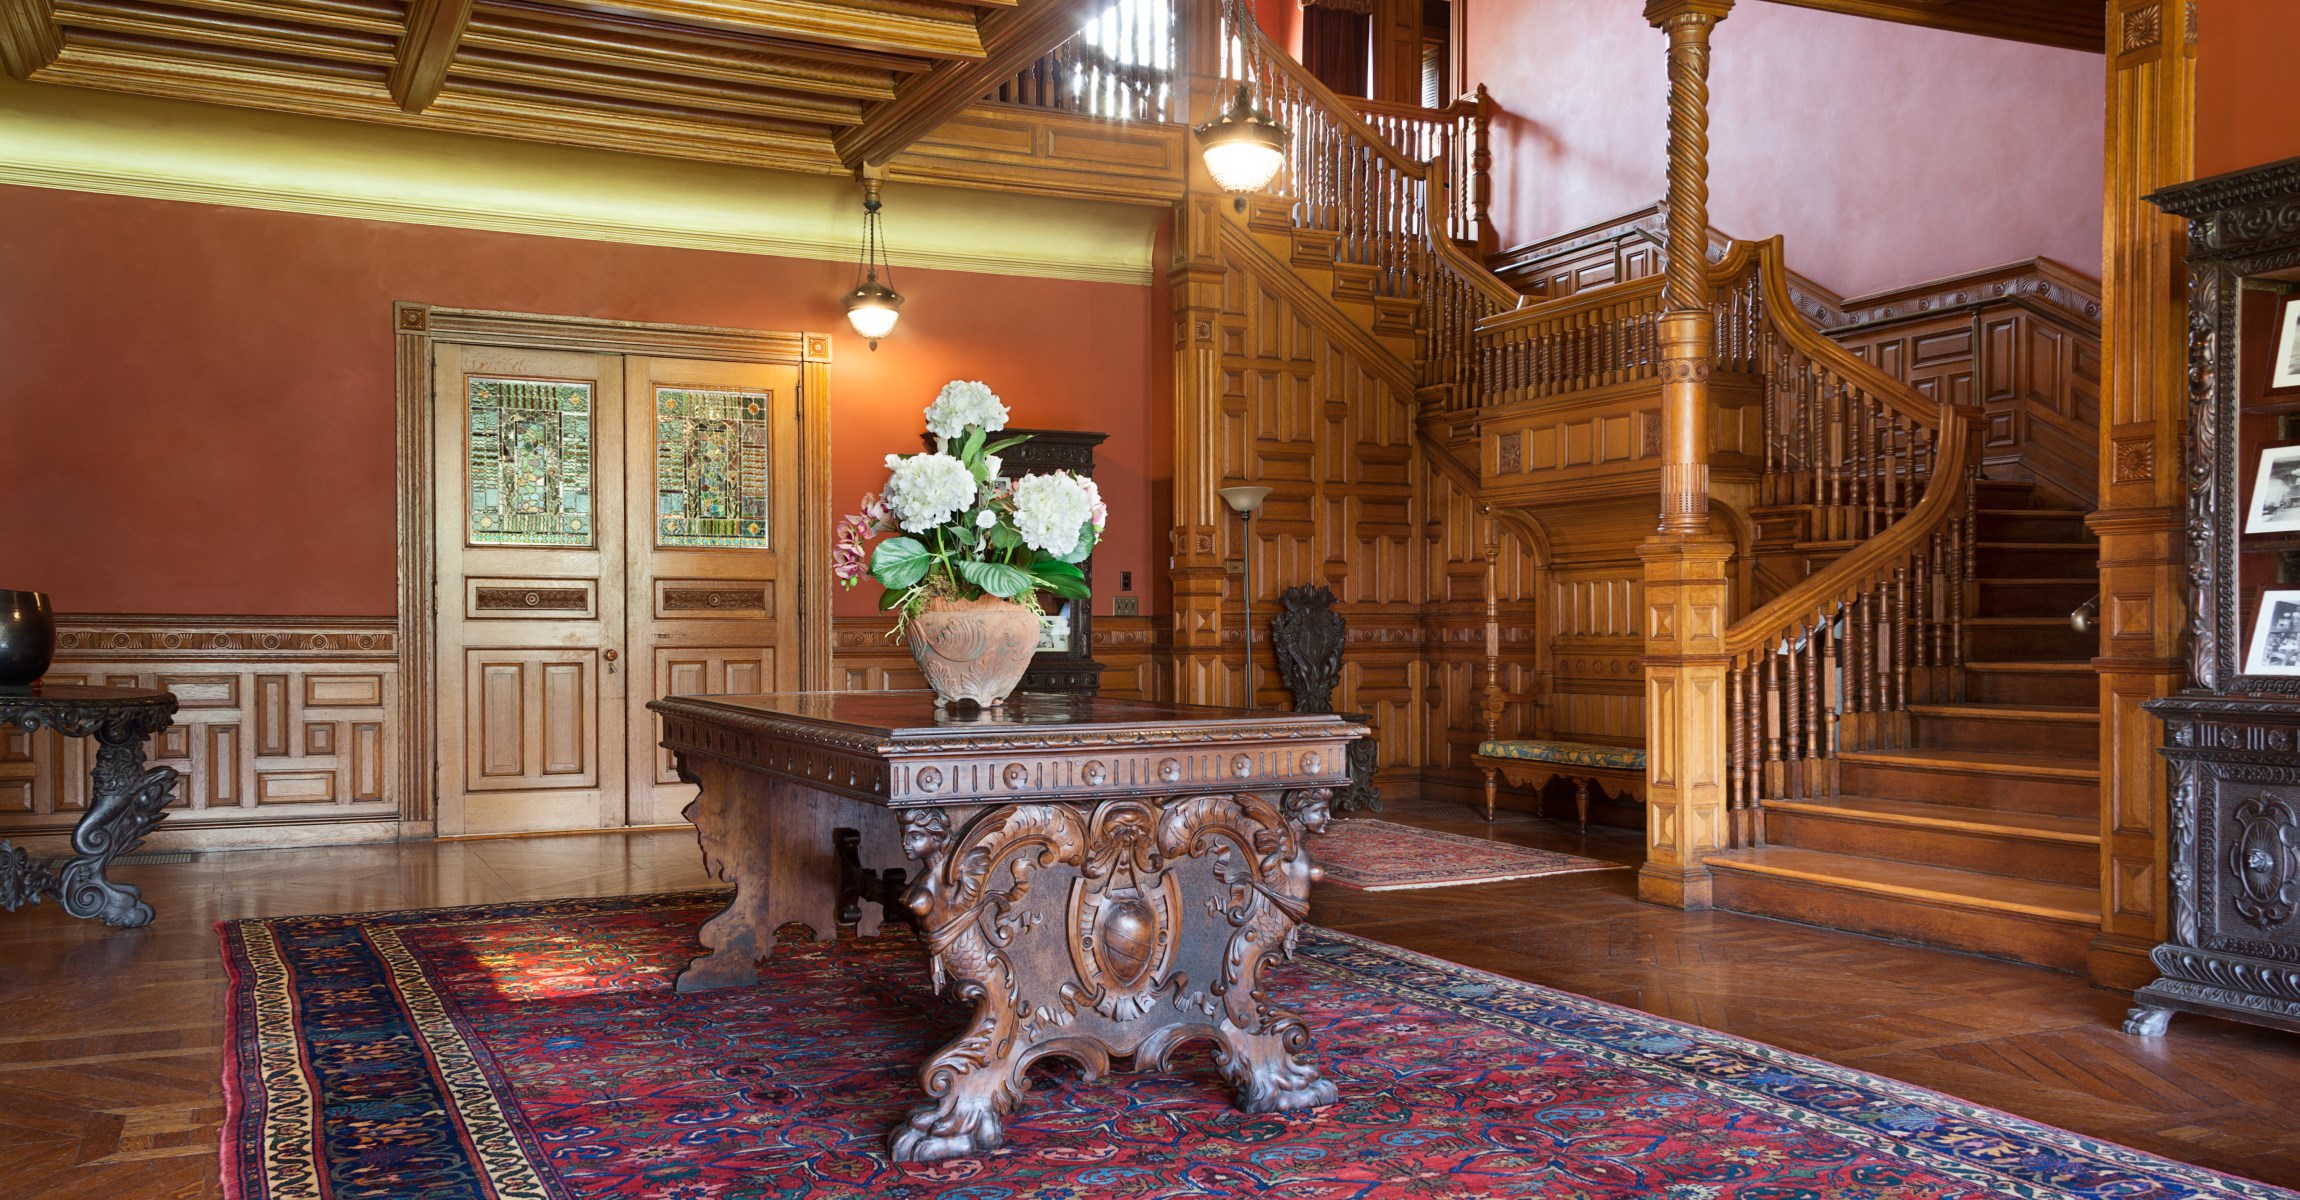 Wood paneled room with large staircase, stained glass panels in the doors, and a dark wood, heavily carved table on a red floral patterned carpet.